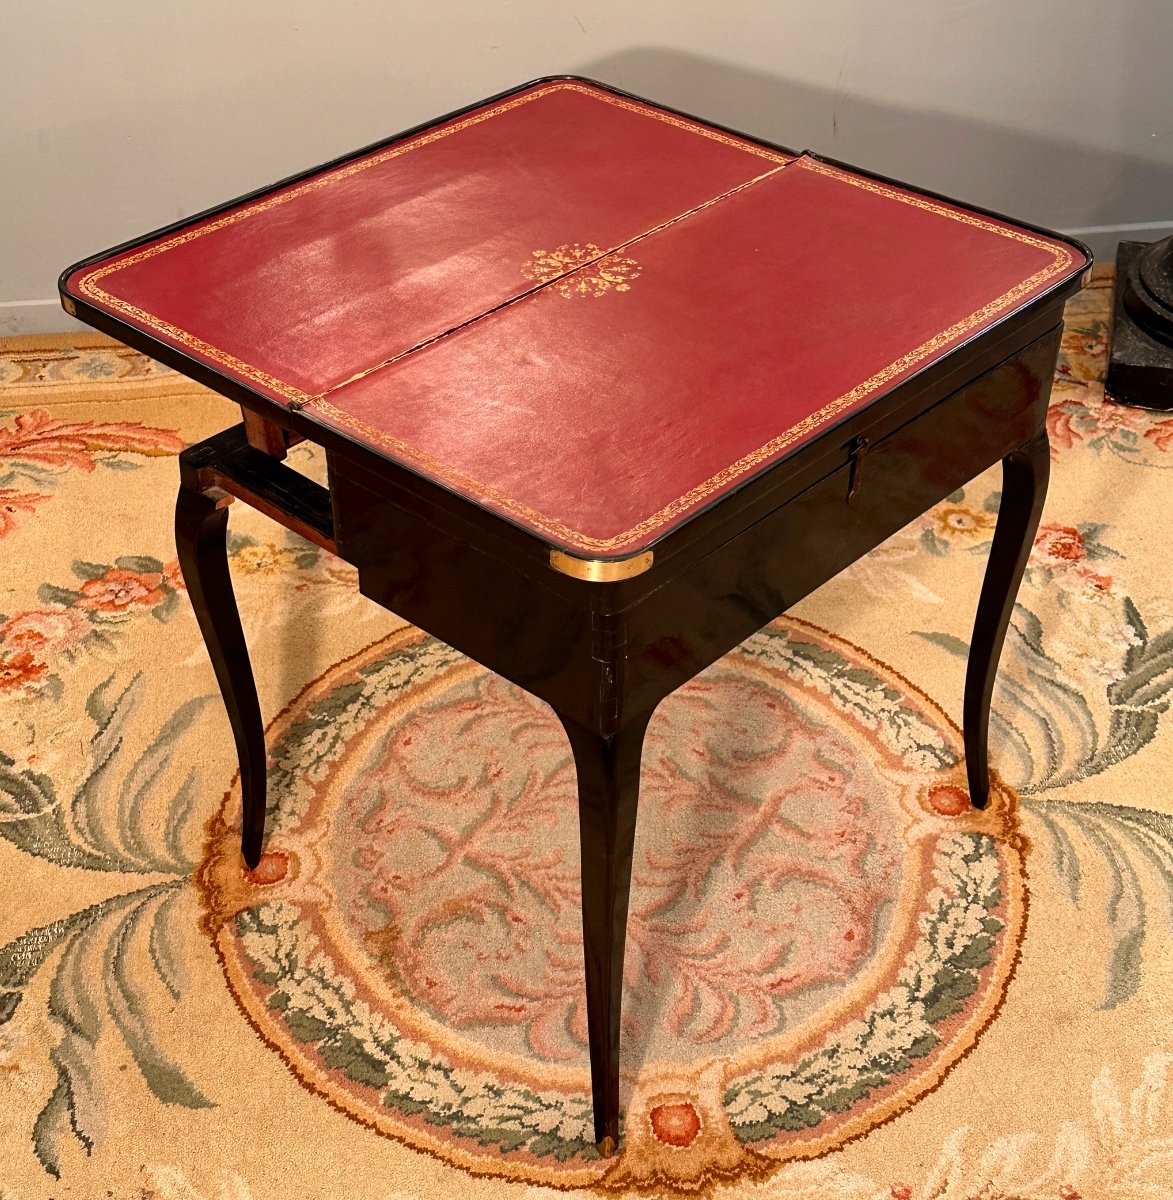 Black Lacquered Tric Trac Game Table, Louis XV Period Around 1750